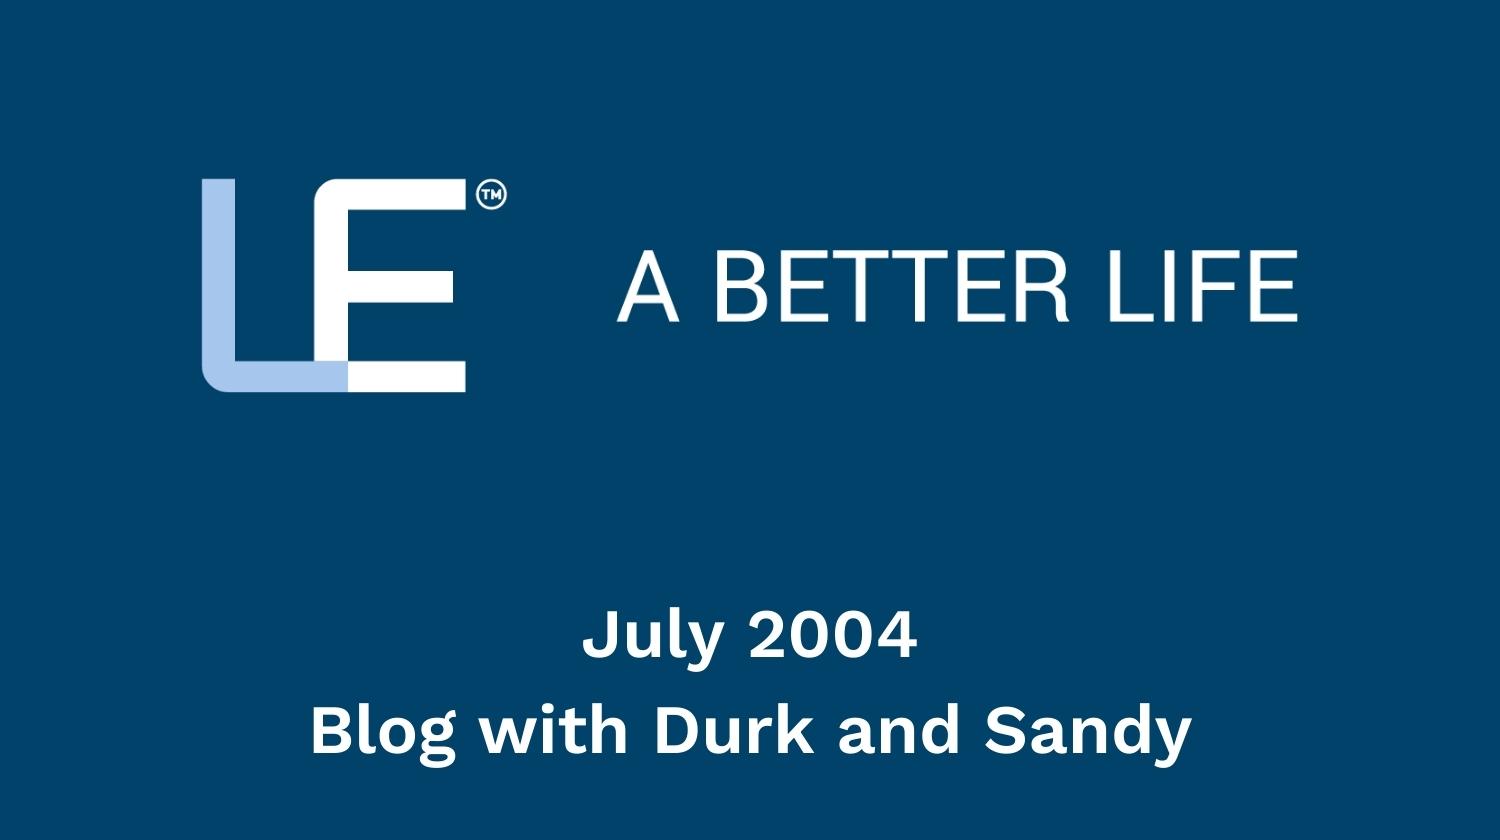 July 2004 Blog with Durk and Sandy